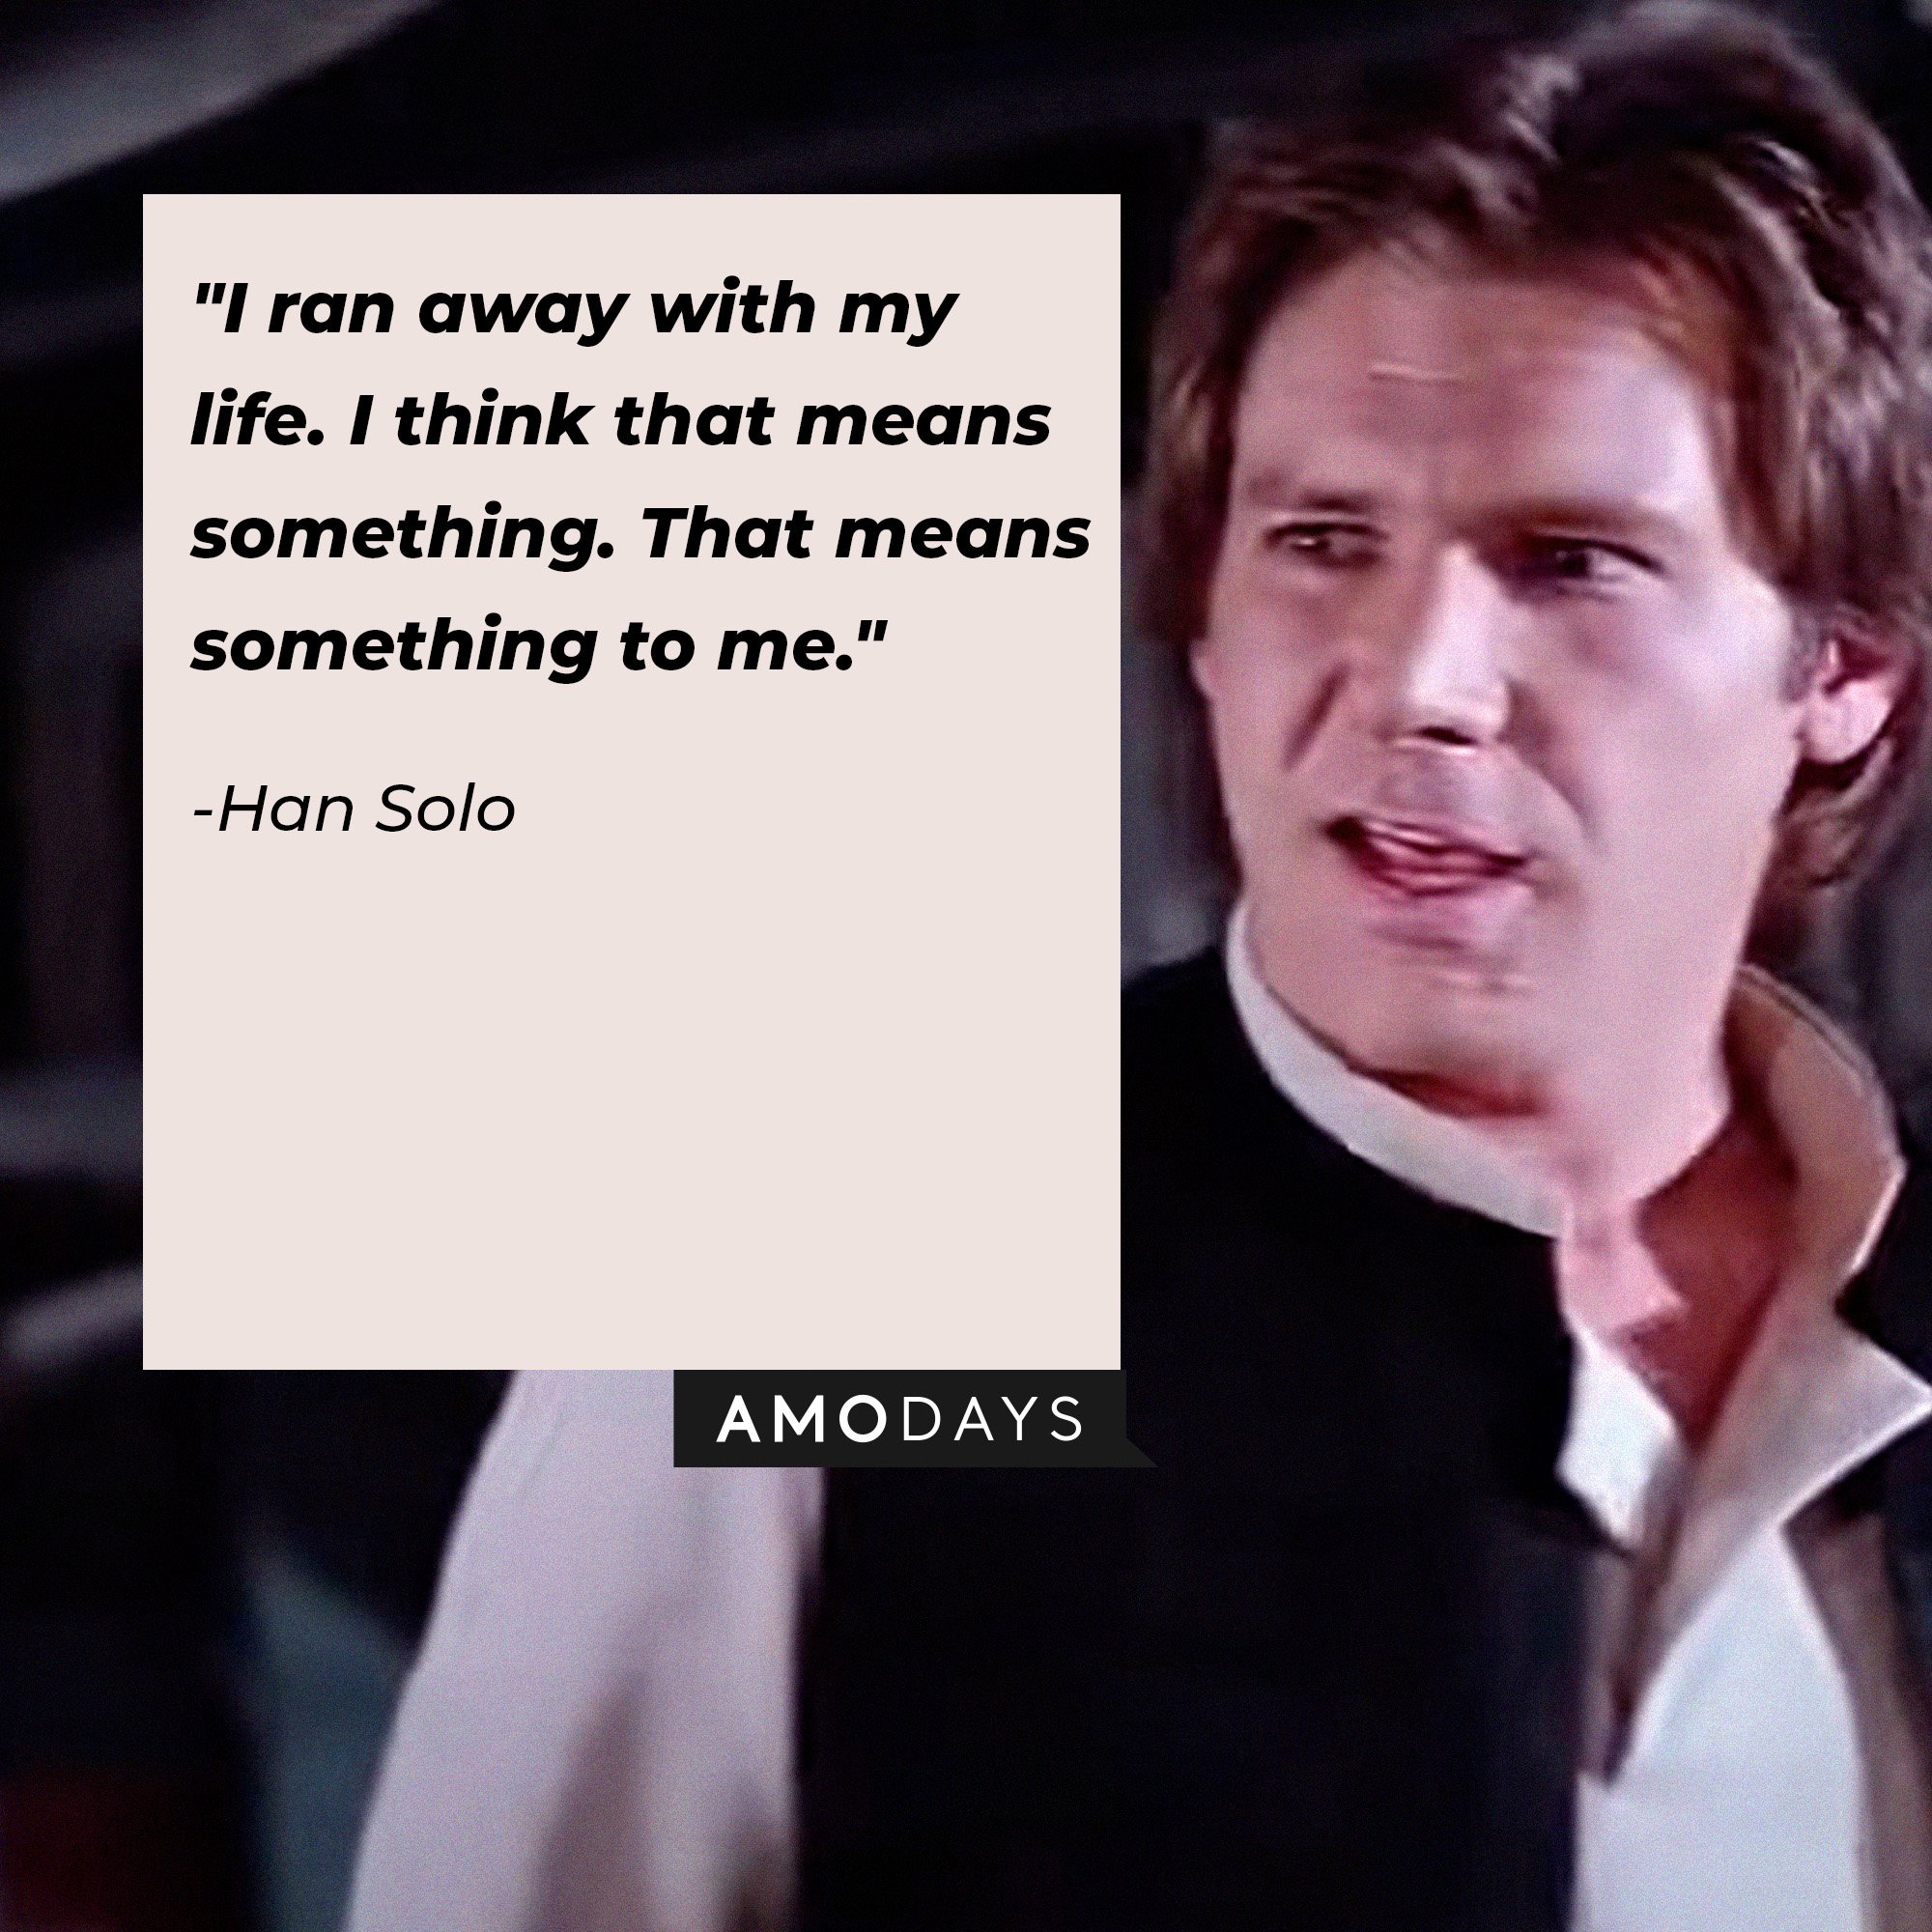 Han Solo’s quote: "I ran away with my life. I think that means something. That means something to me." | Image: AmoDays